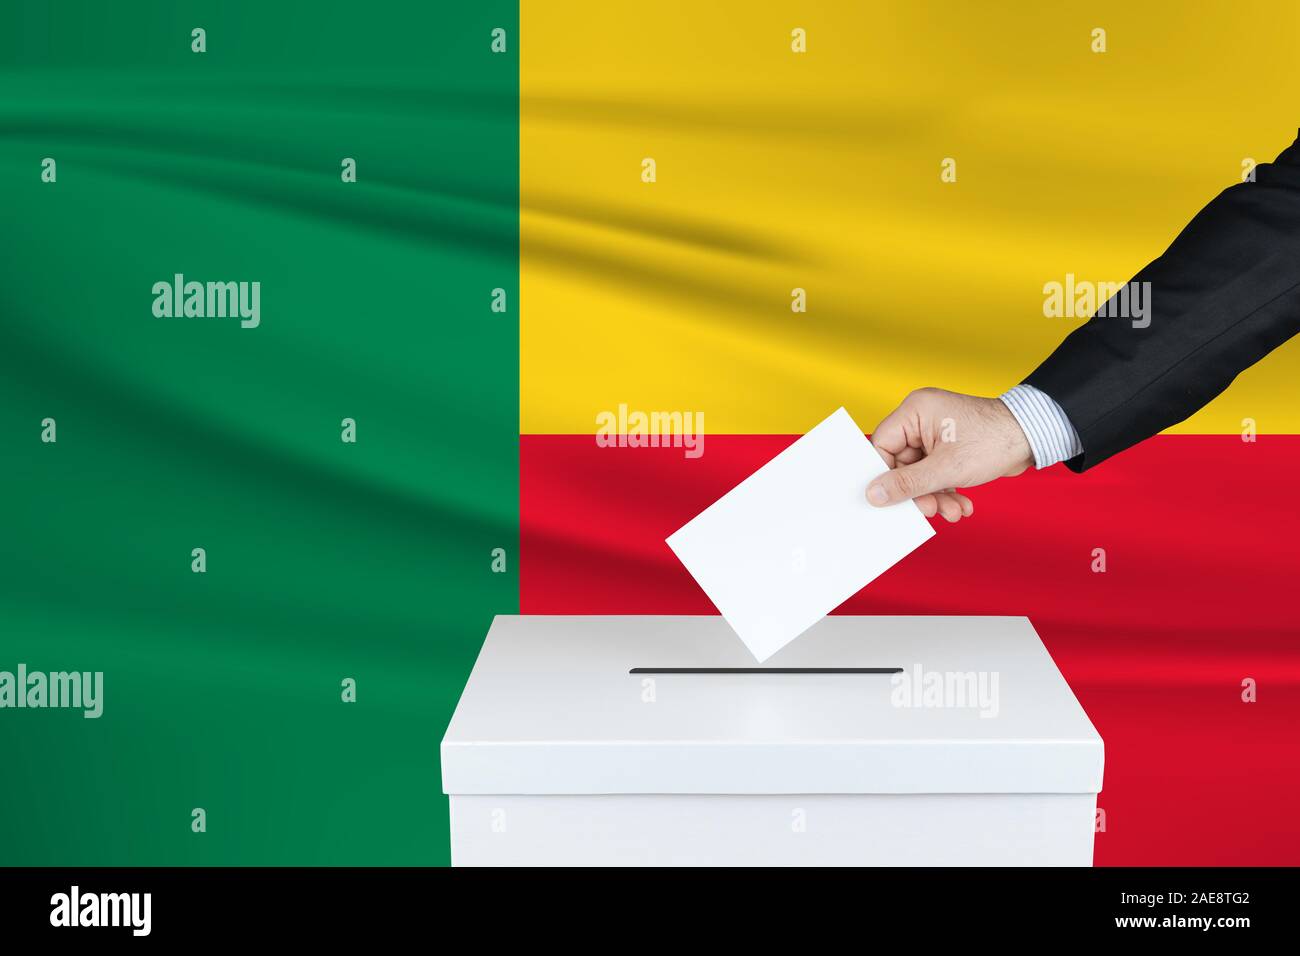 Election in Benin. The hand of man putting his vote in the ballot box. Waved Benin flag on background. Stock Photo